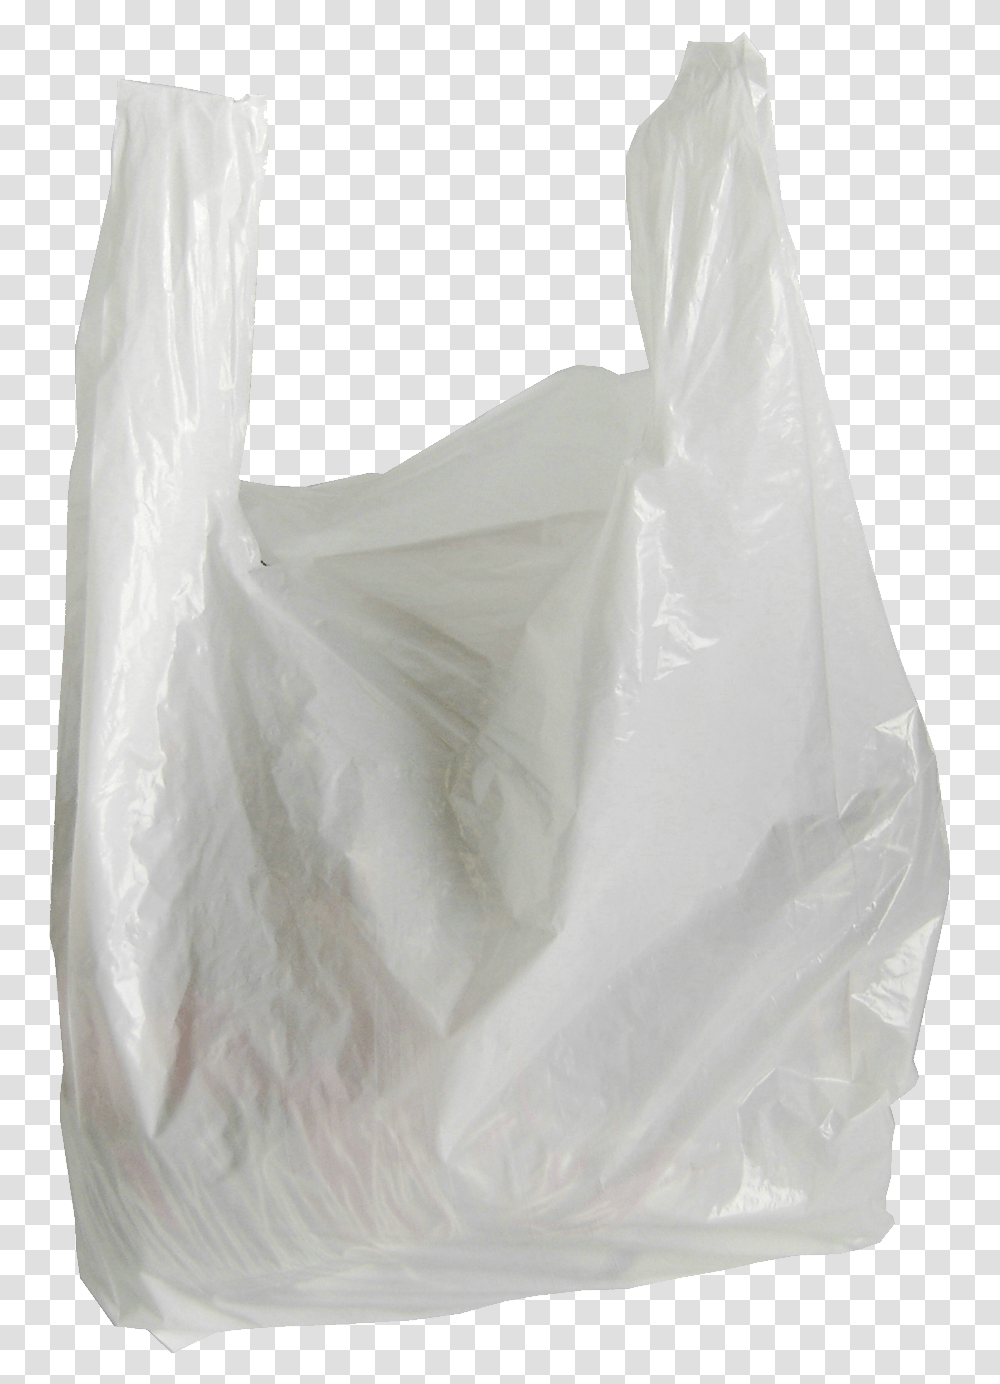 Plastic Bag Bags, Wedding Gown, Robe, Fashion, Clothing Transparent Png